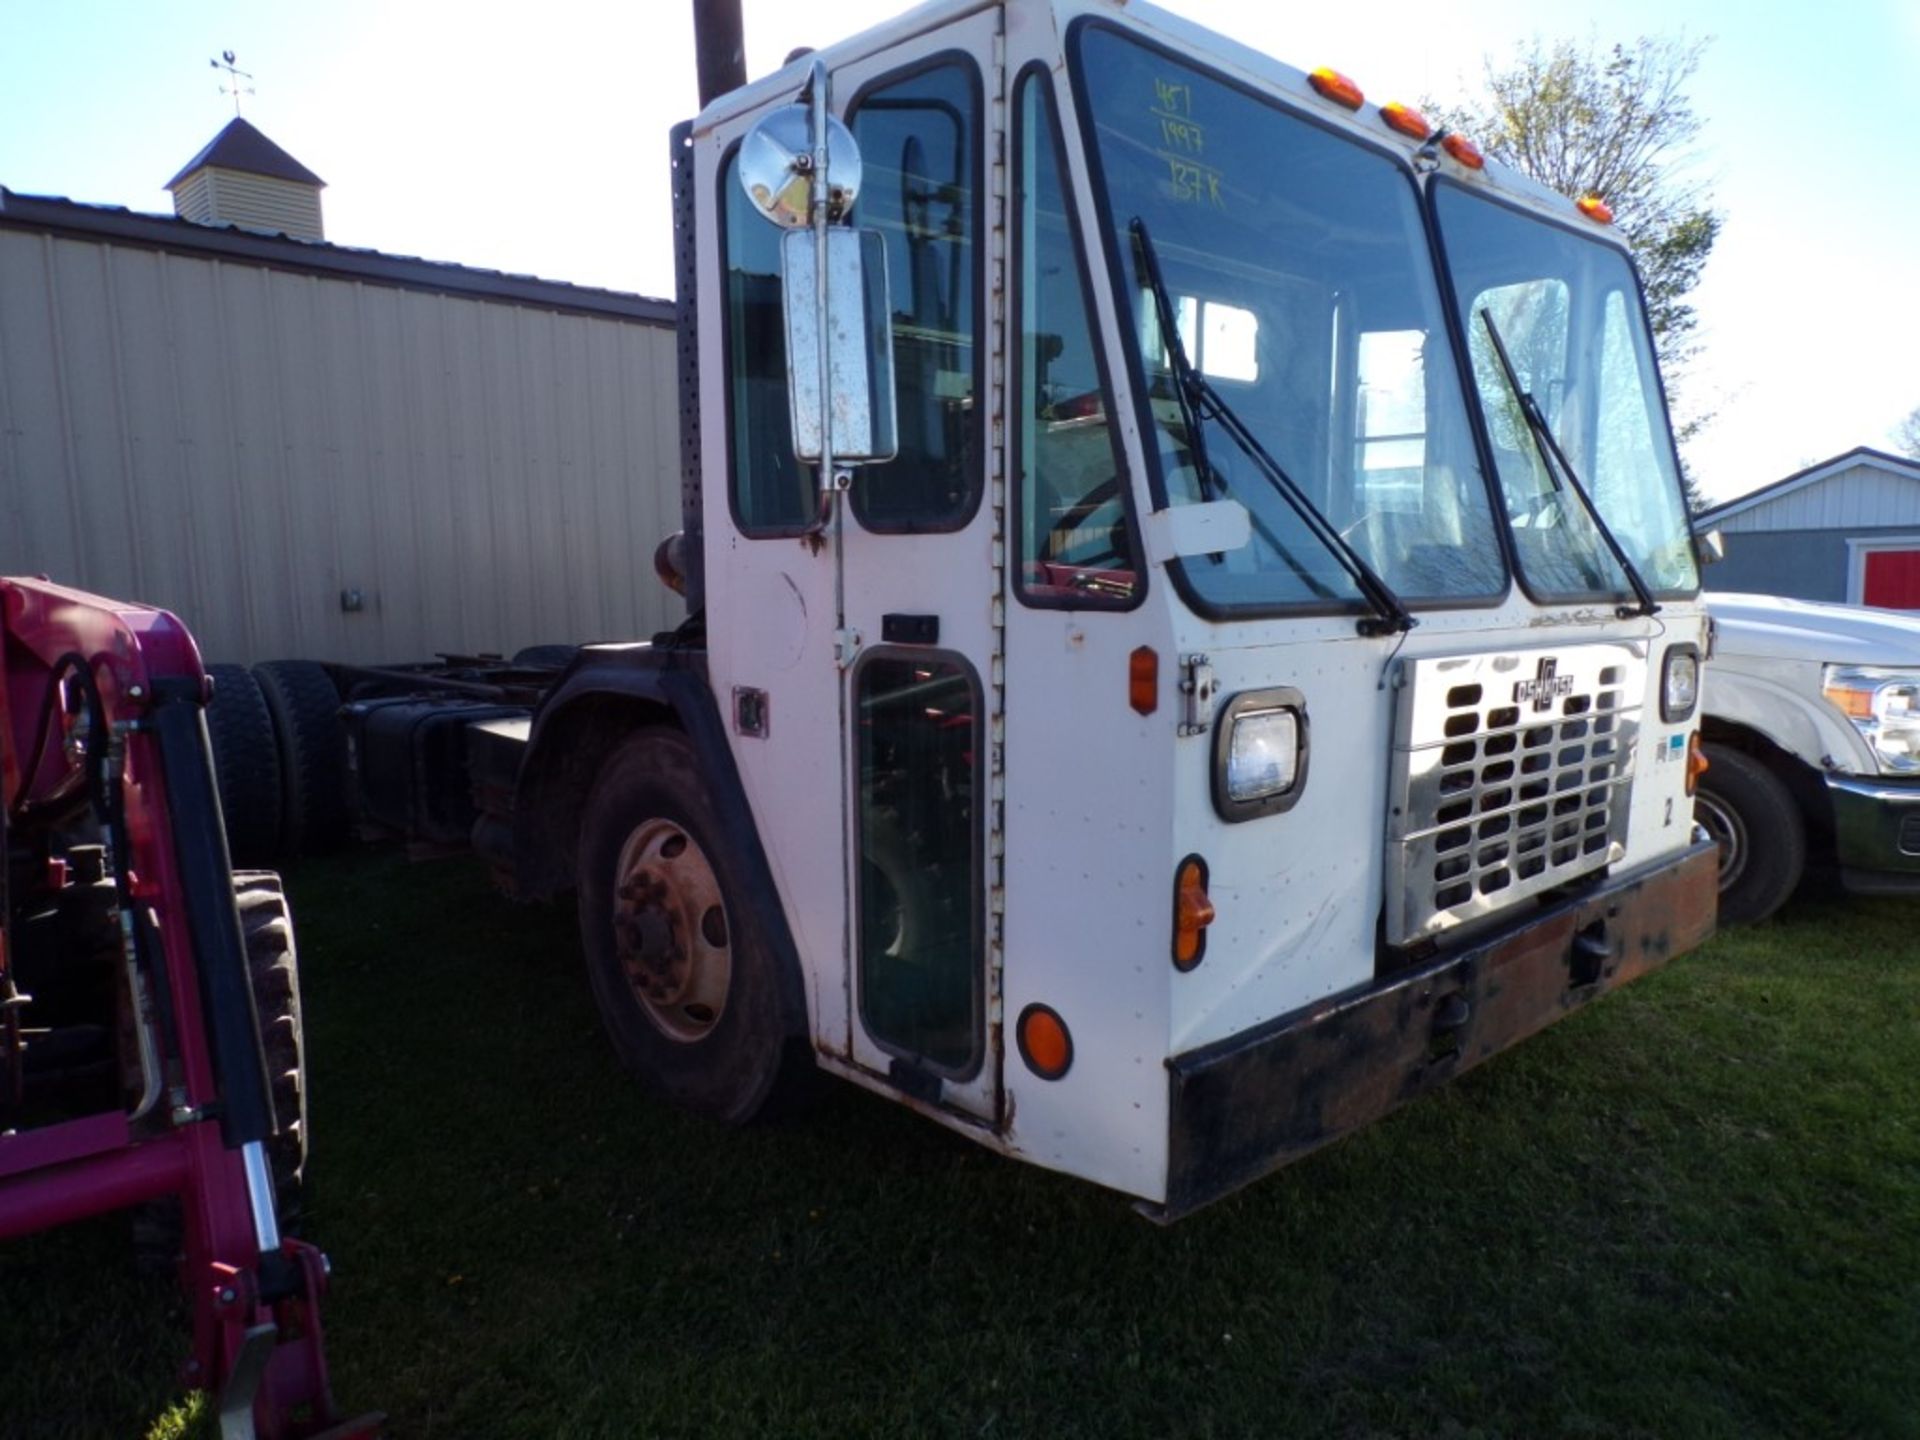 1997 Osh Kosh Cab Over Cab and Chassis, Single Axle, Auto, Detroit Series 50 4 Cycle, Original